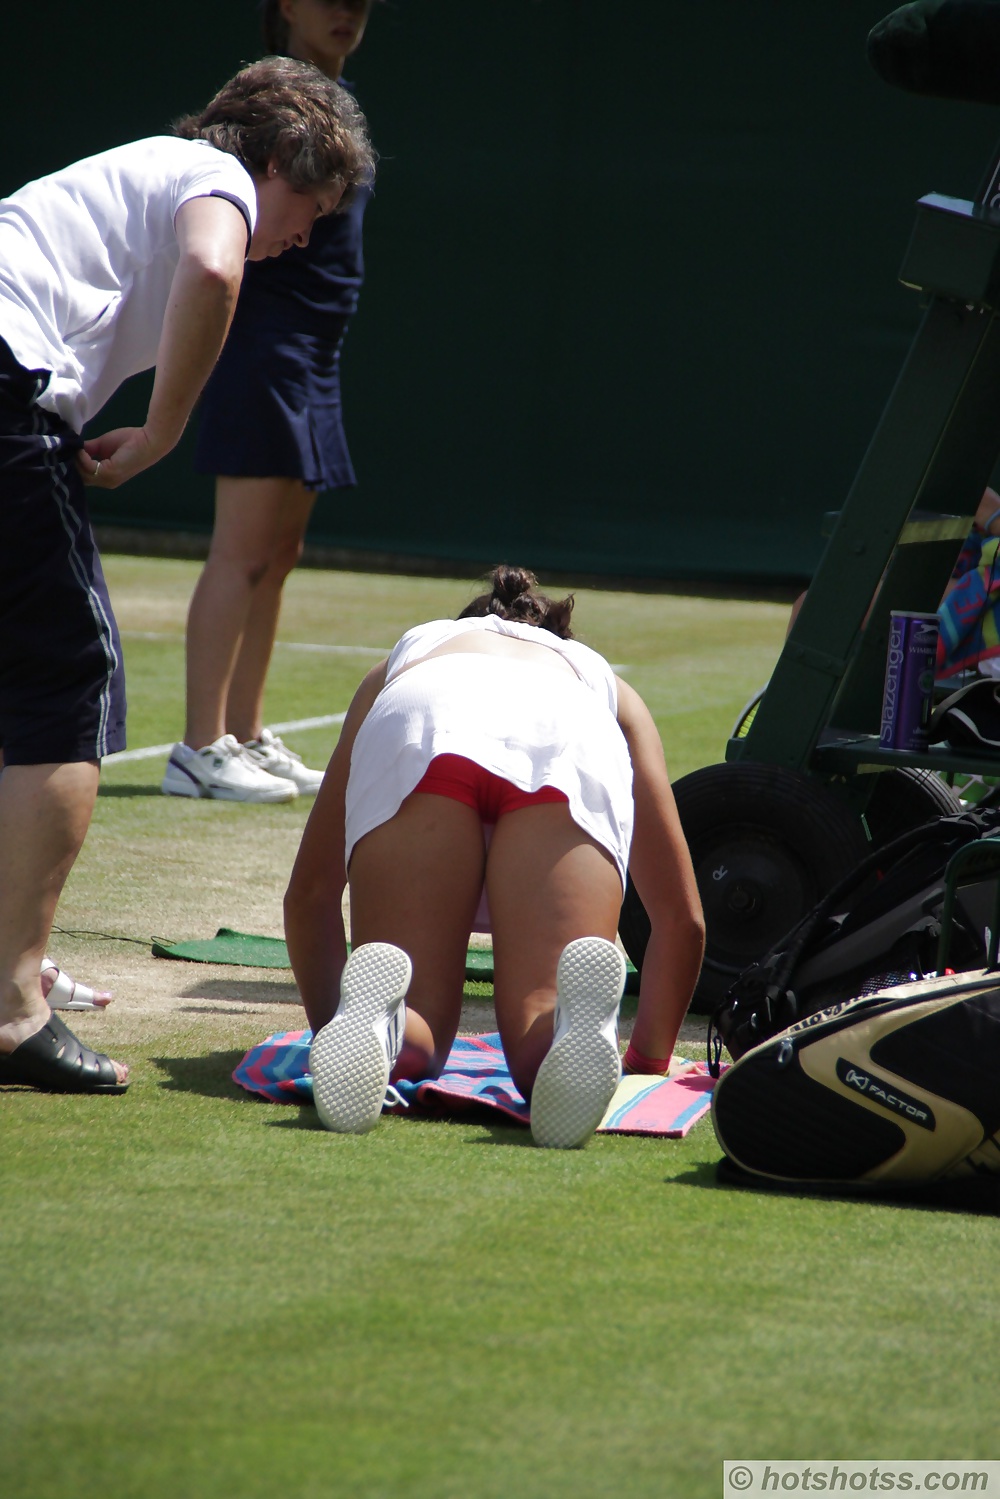 Laura Robson Oncourt #40276552